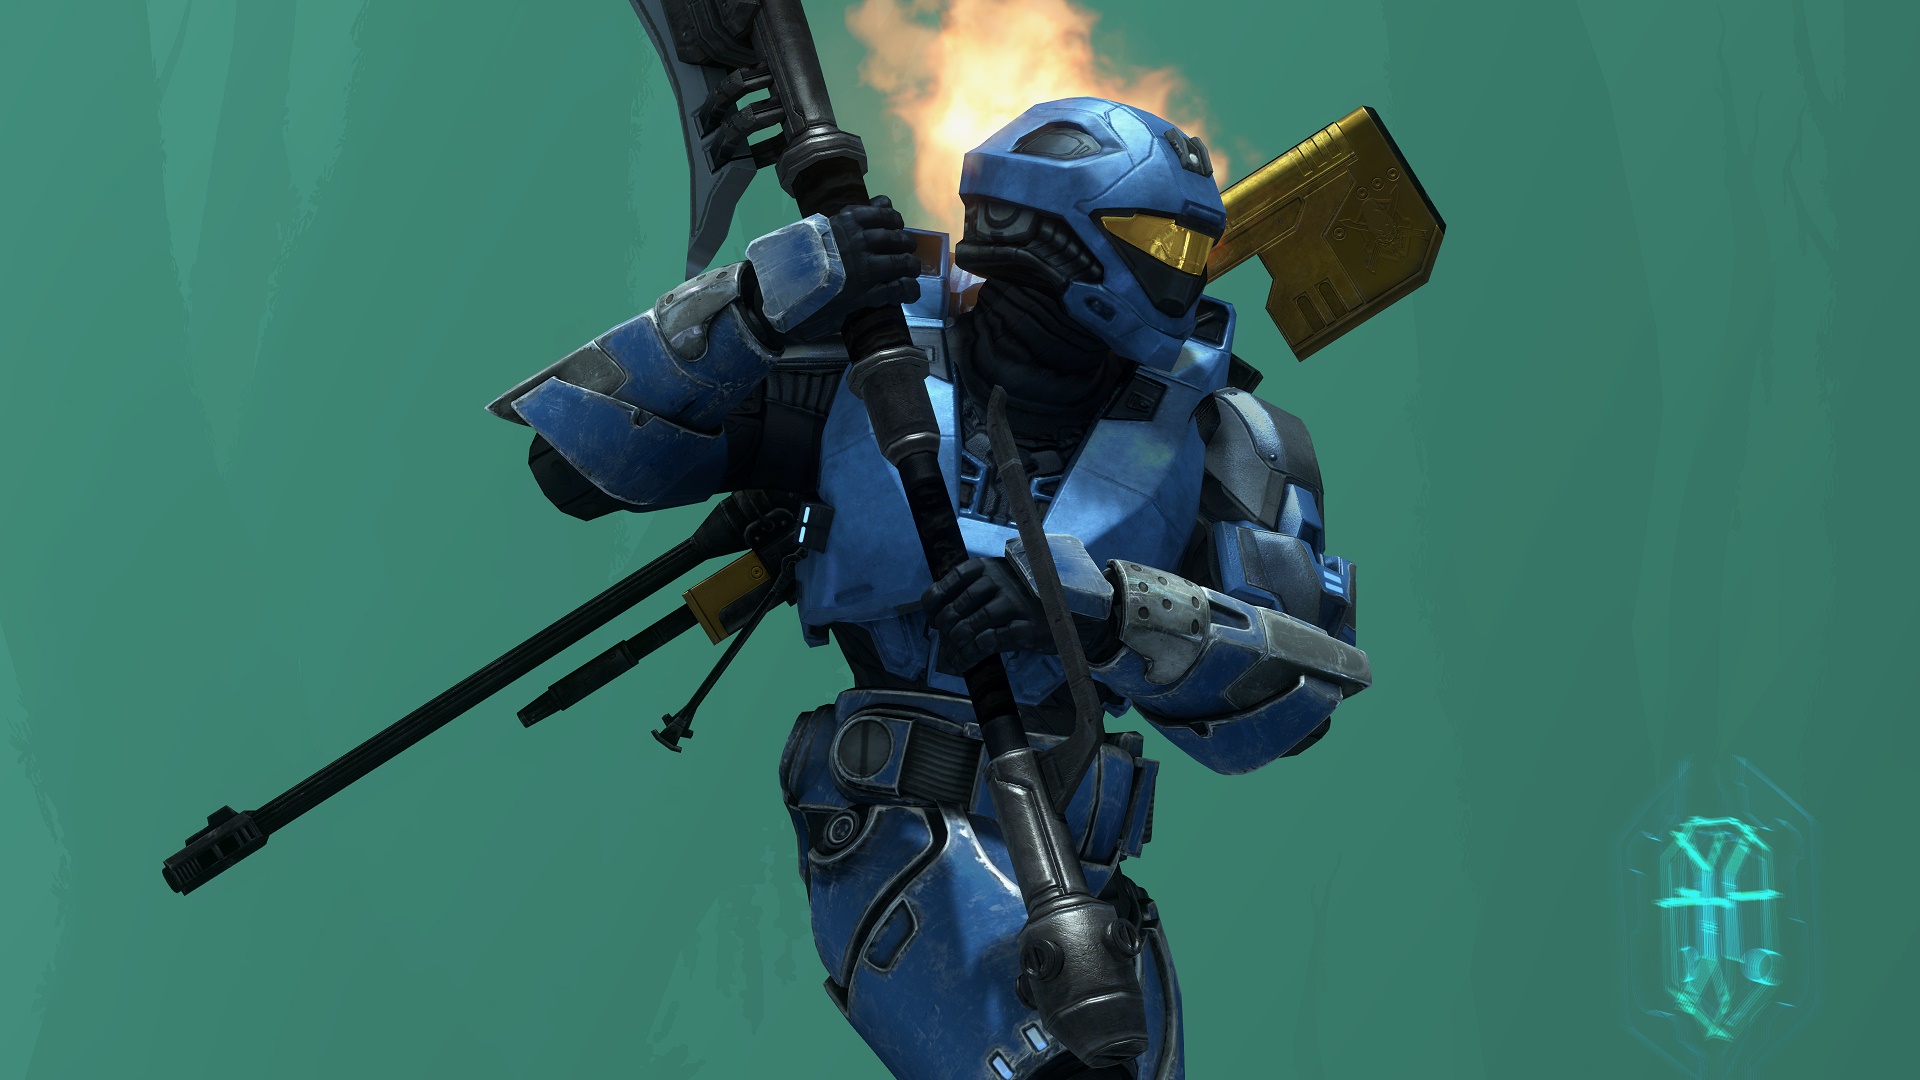 Halo 3 screenshot of a Spartan with the Recon helmet on Guardian